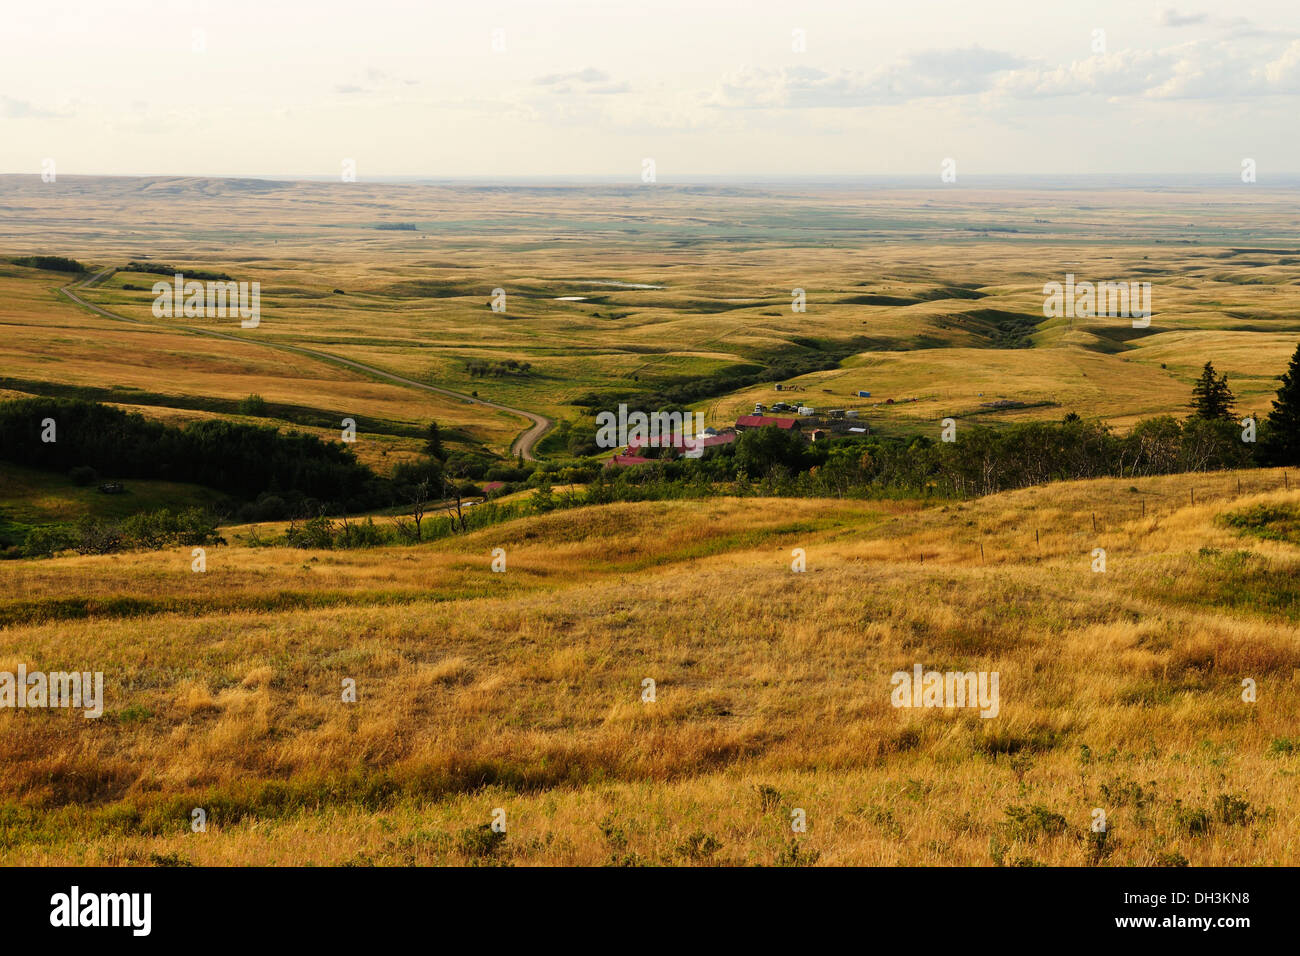 Hilly landscape of the prairie with a cattle ranch, Cypress Hills, Saskatchewan Province, Canada Stock Photo